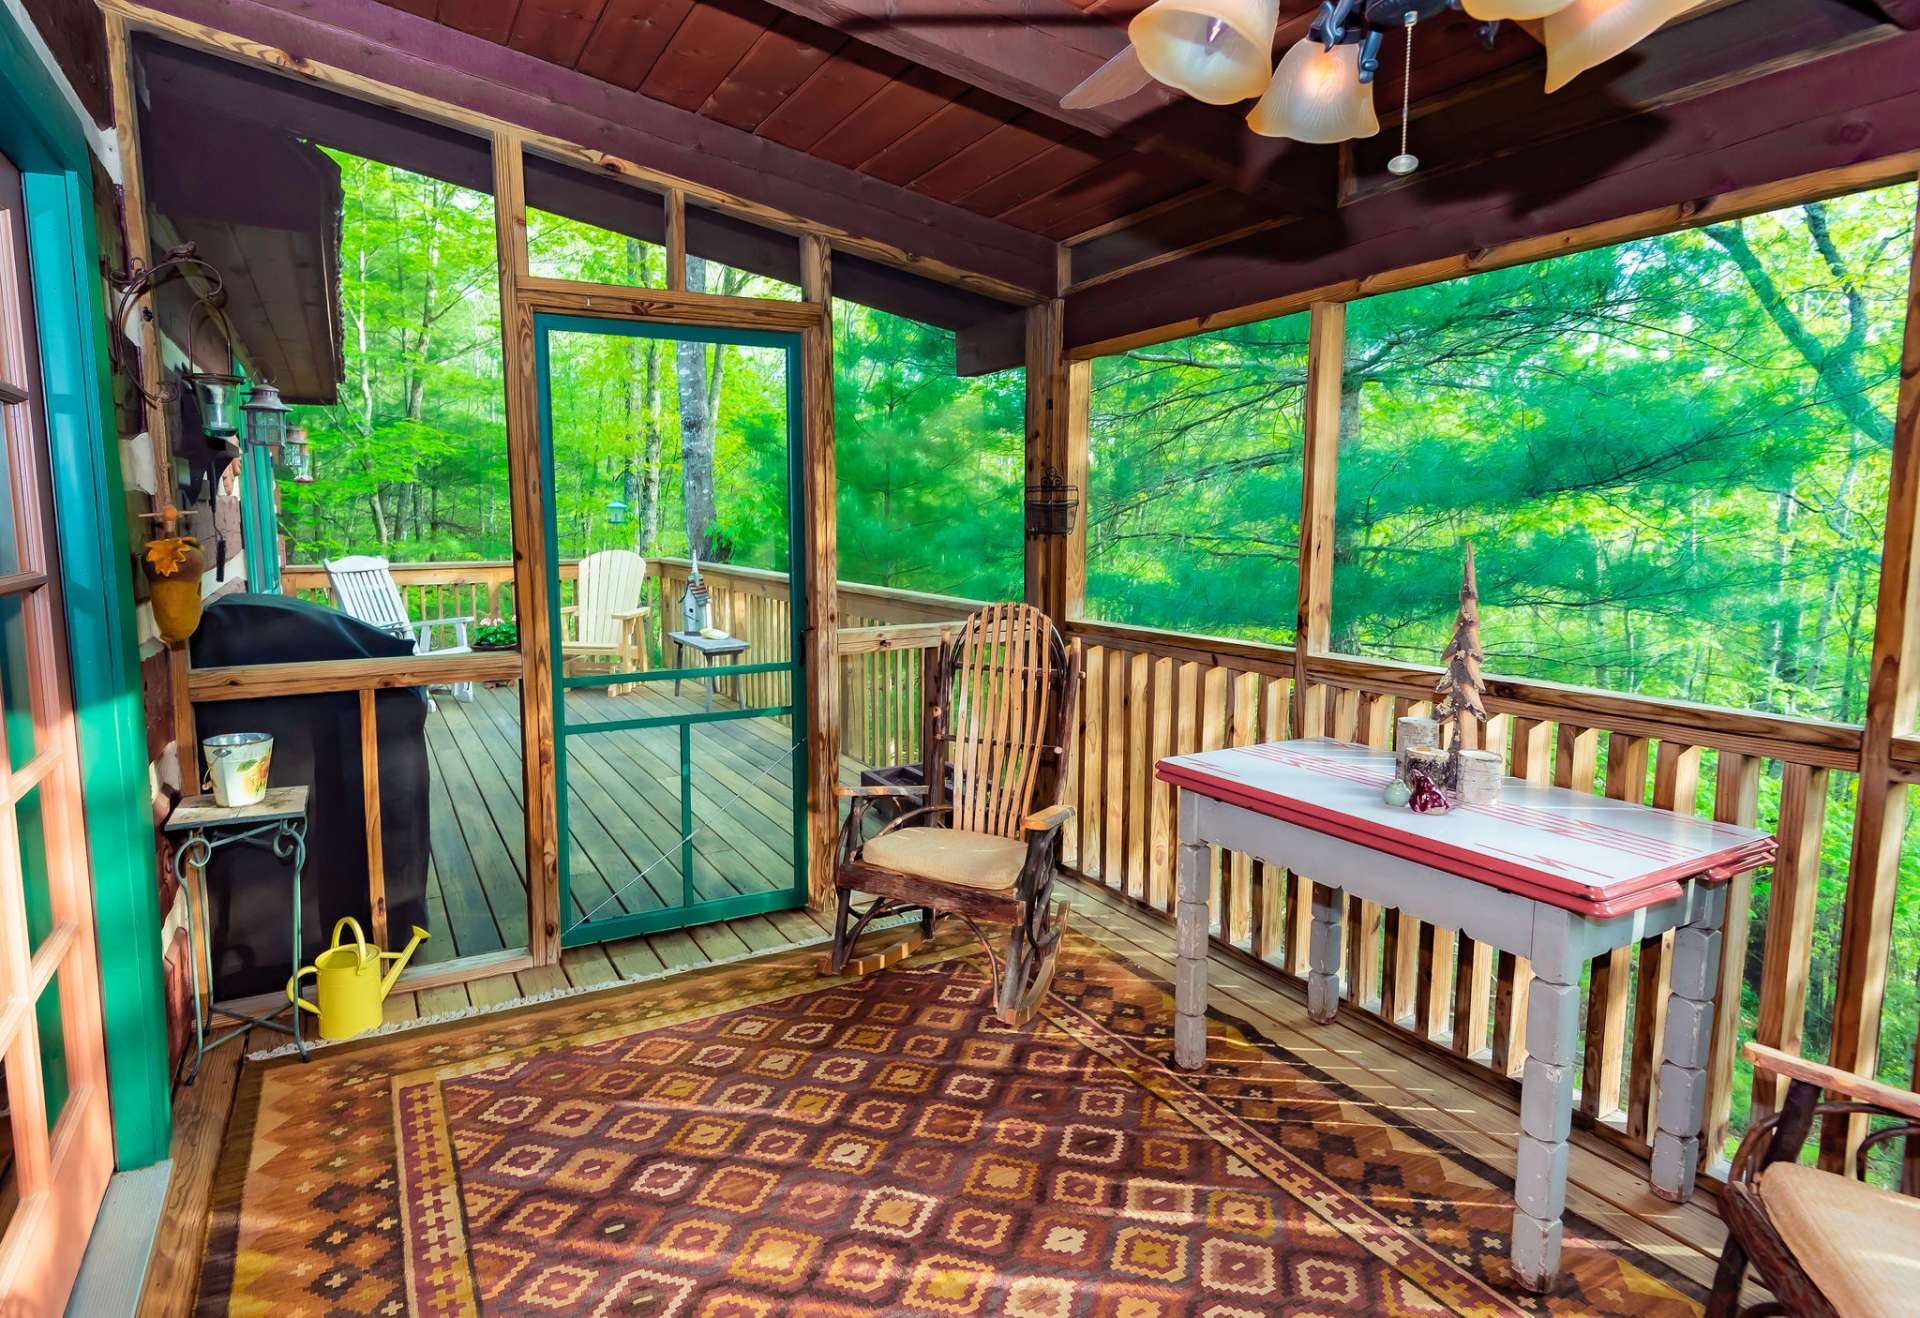 The screened in porch area is perfect for outdoor dining and expands the living space during the warmer months.